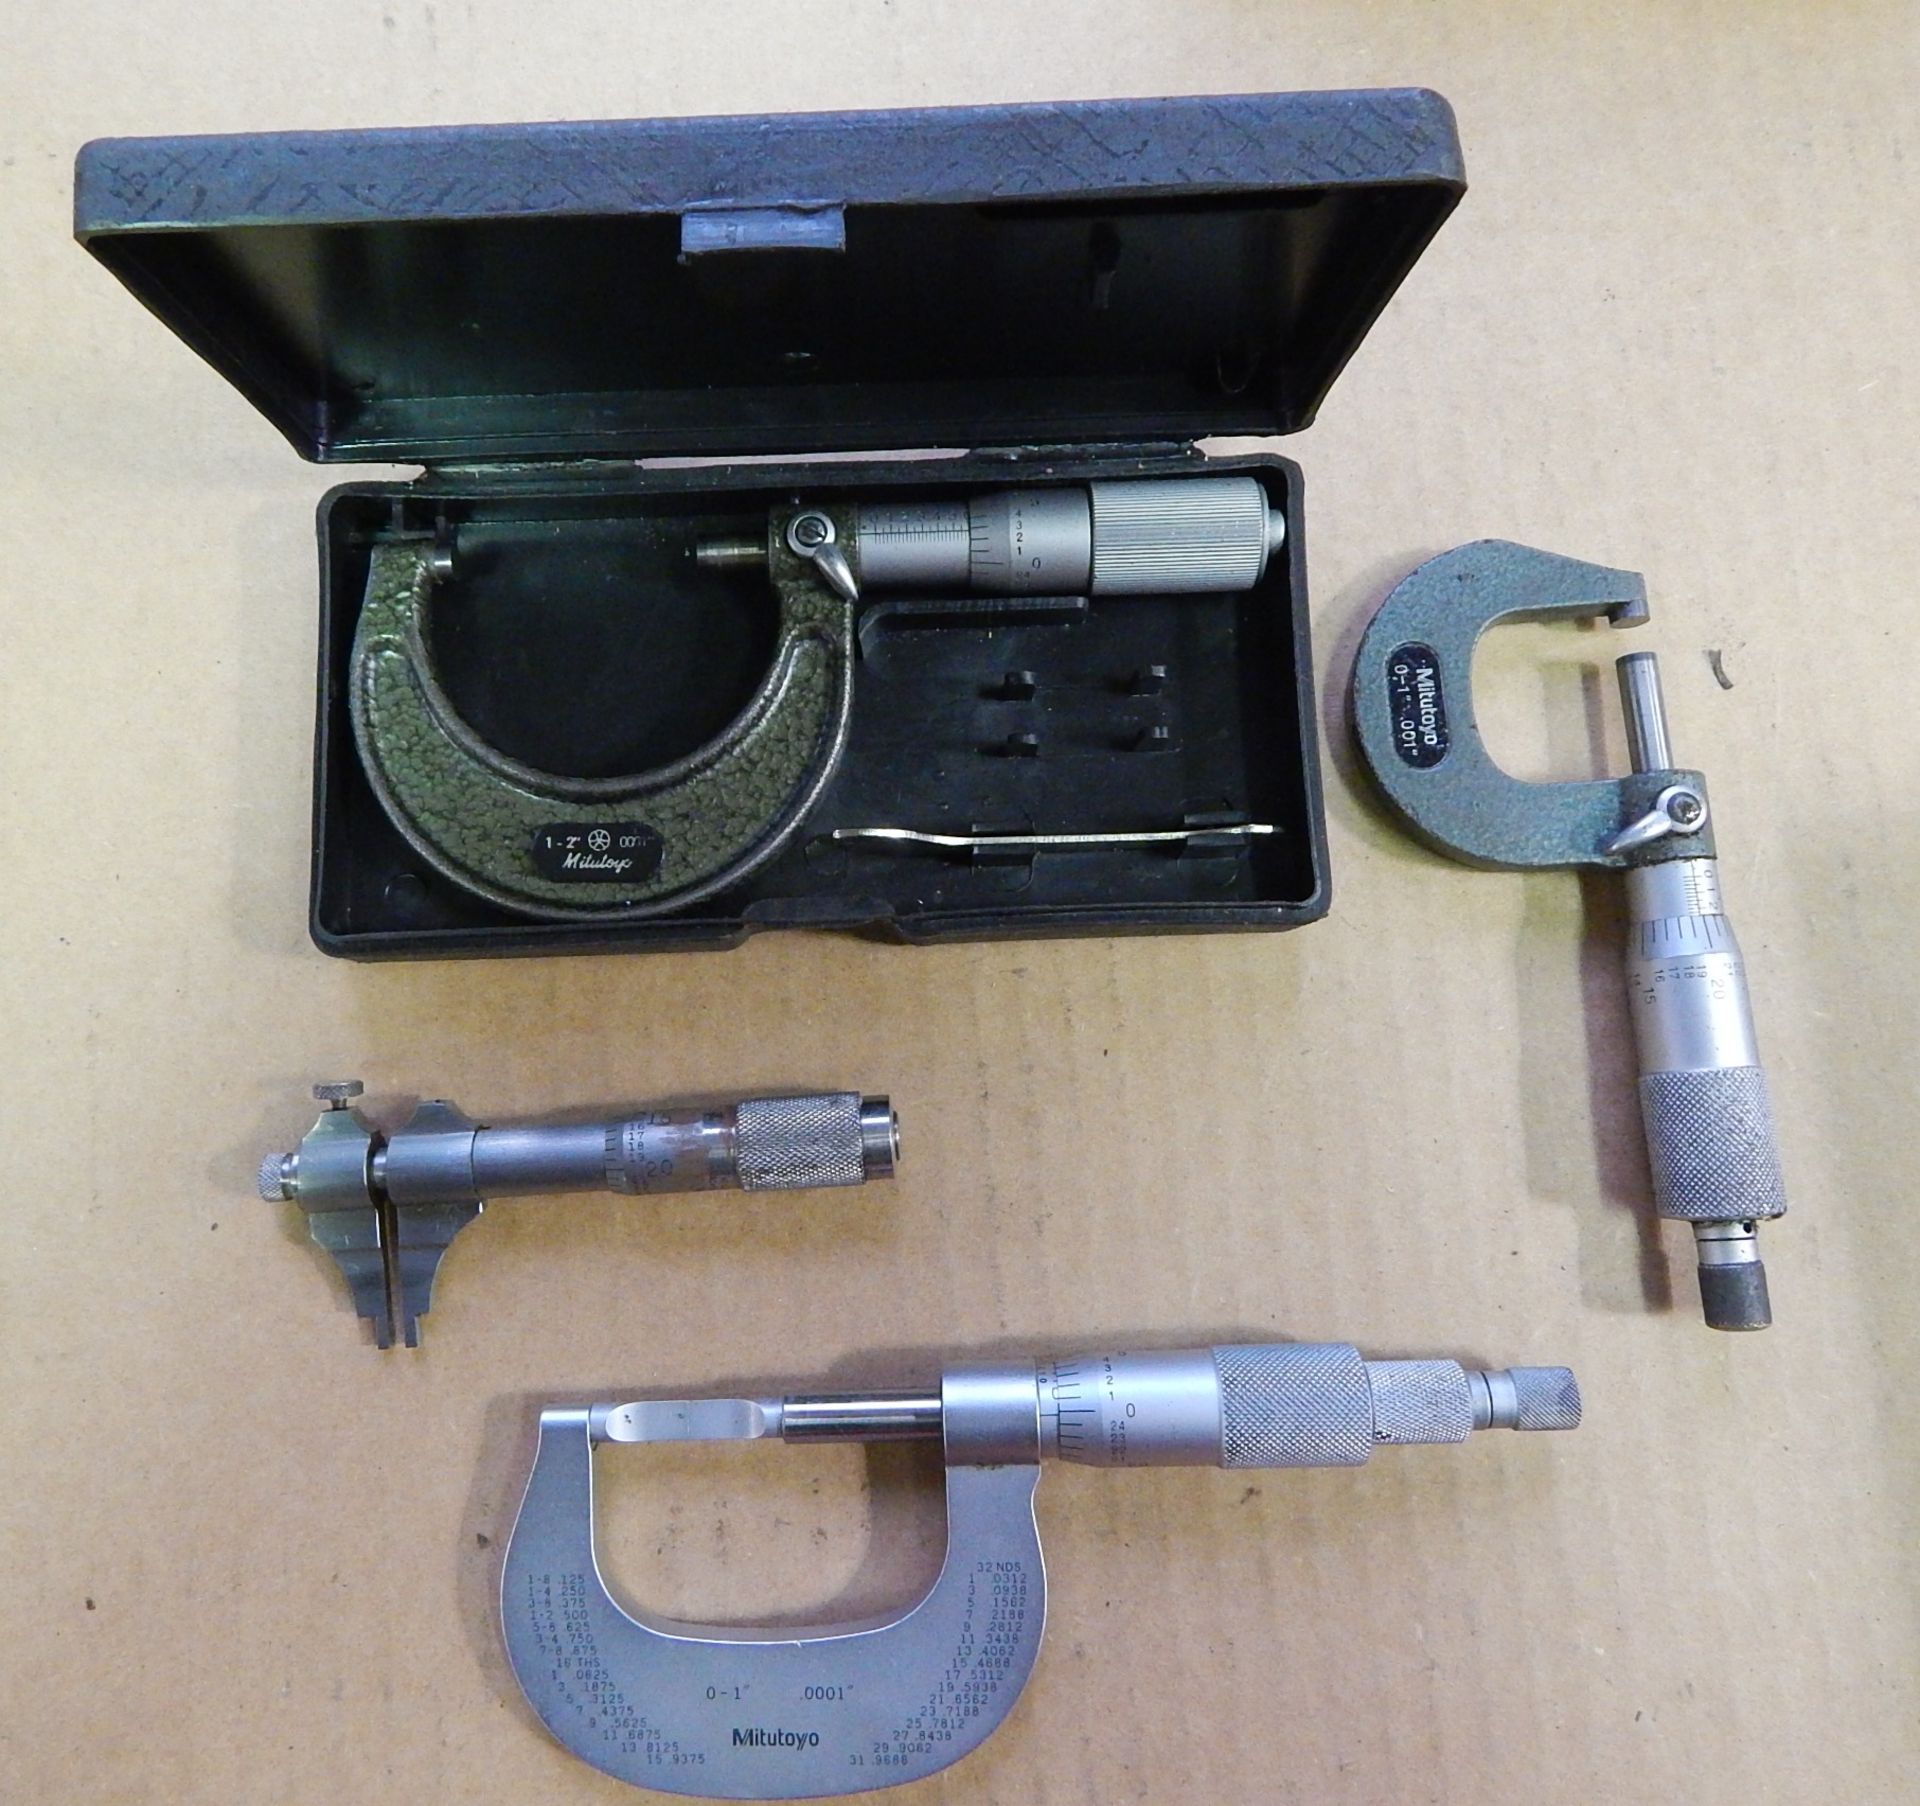 Mitutoyo 0 - 1 In. Blade Micrometer, Mitutoyo 0 - 1 In. and 1 In. - 2 In. Micrometer and Starrett